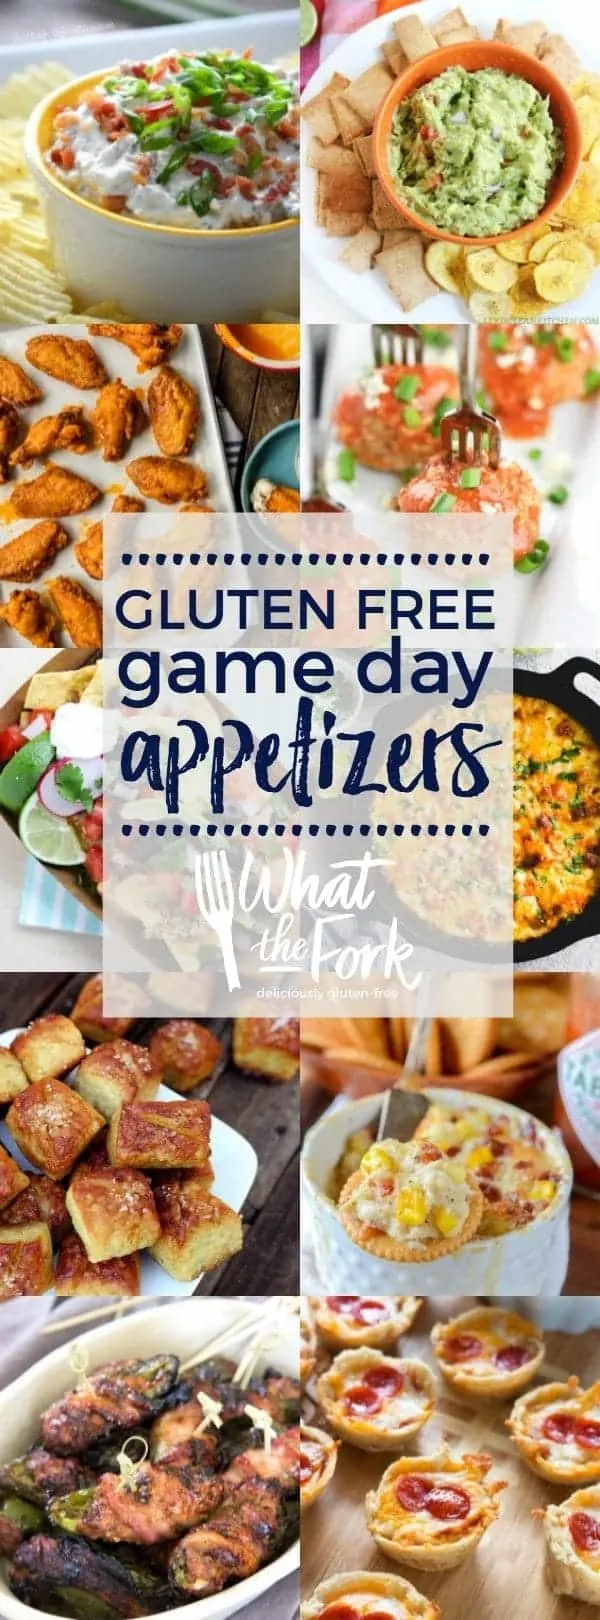 All the gluten free snacks and gluten free game day appetizers you need to get your party started! | @whattheforkblog | whattheforkfoodblog | game day food | party food | gluten free appetizers | gluten free snacks | finger foods and dips | party snacks | party food